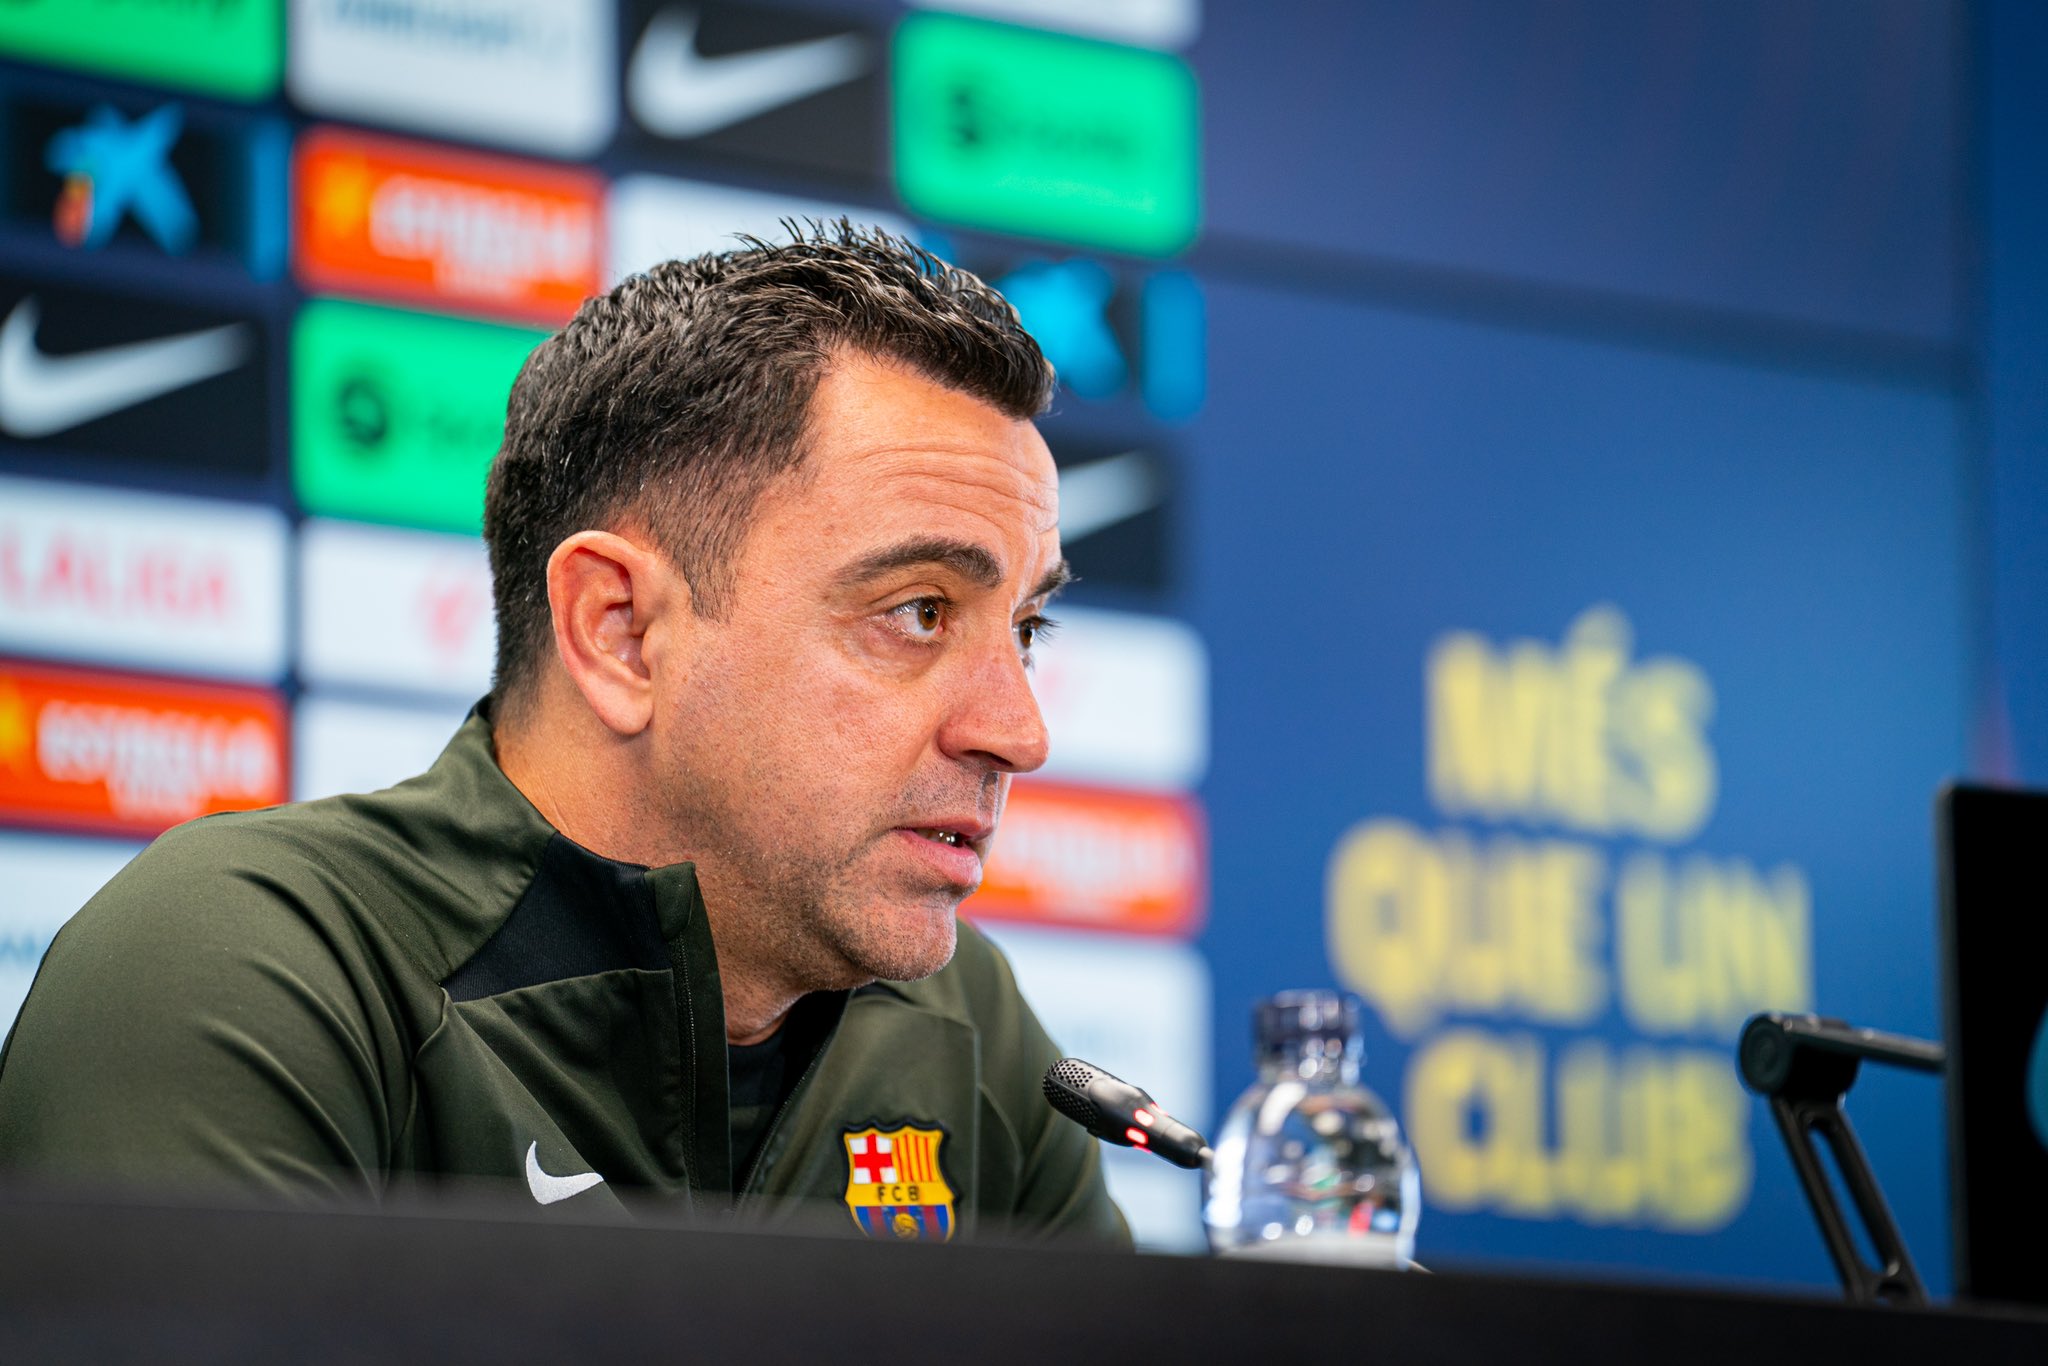 Xavi Hernandez requests meeting with Barcelona to discuss U-turn on resignation